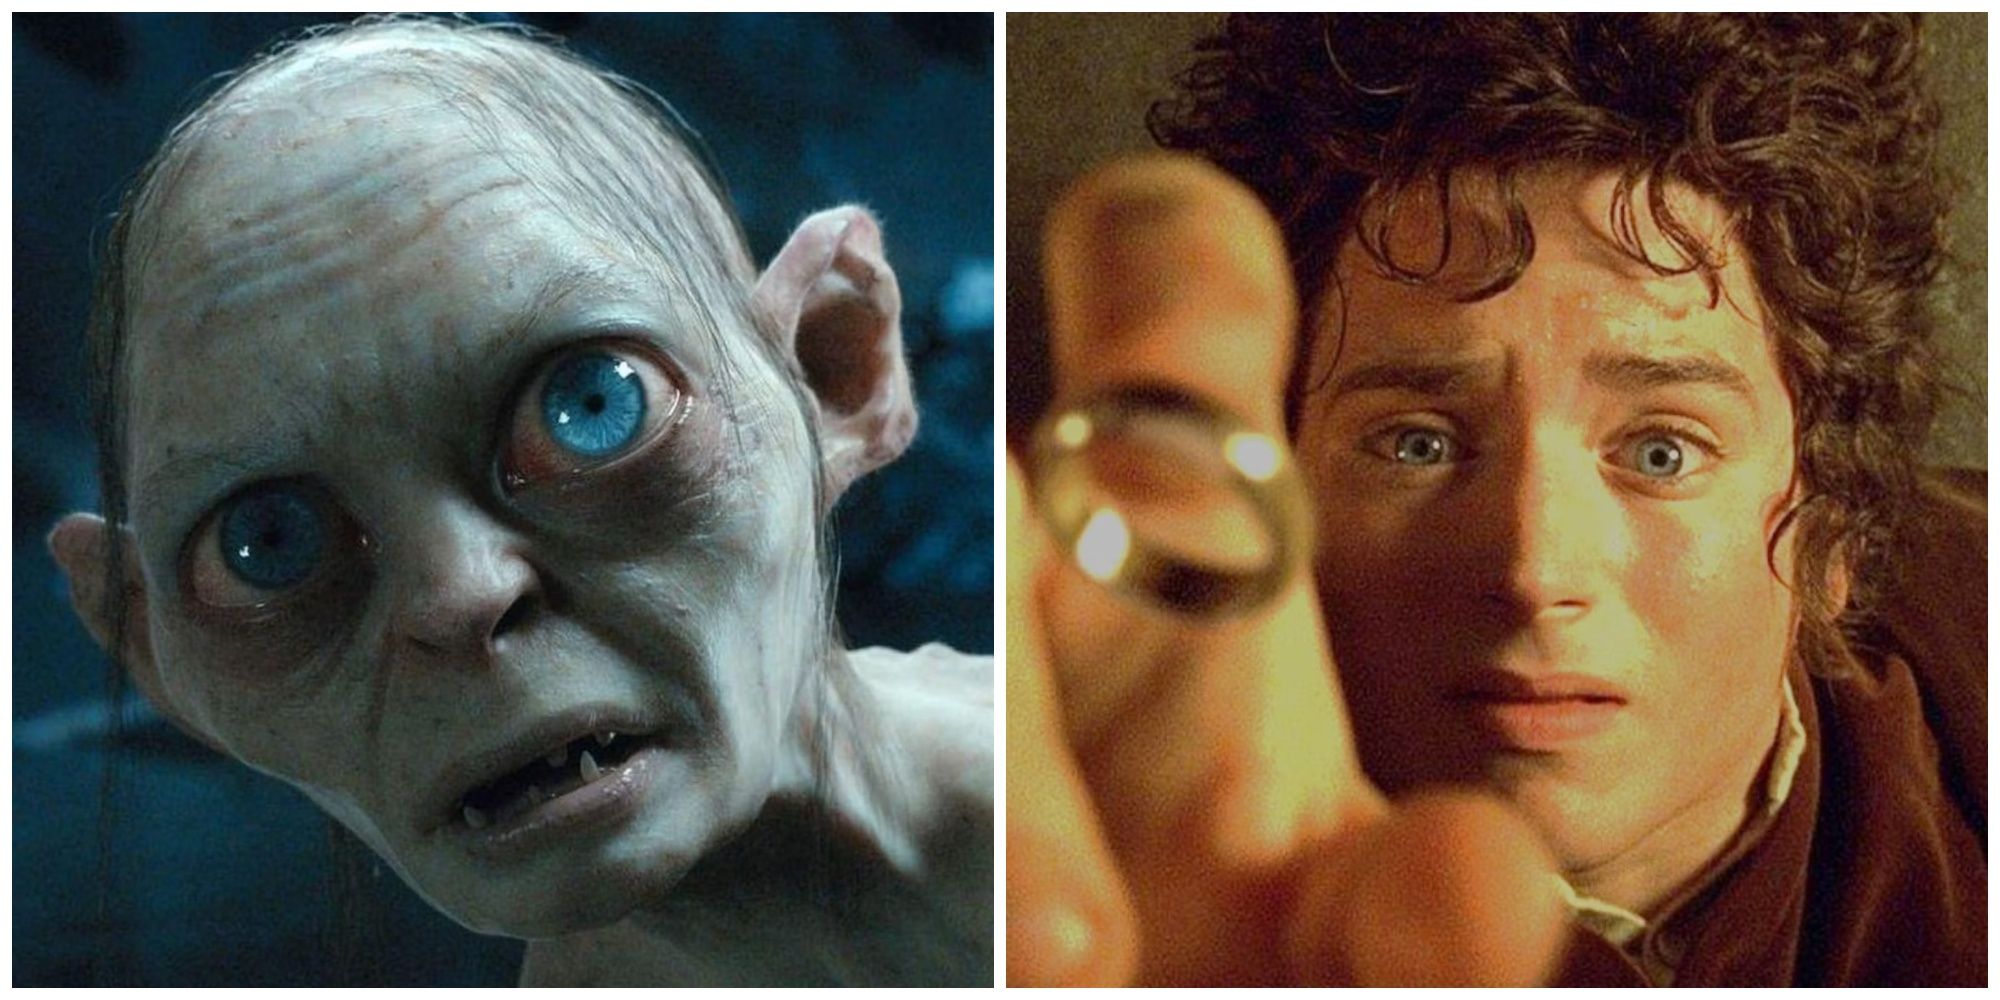 gollum and frodo in the lord of the rings